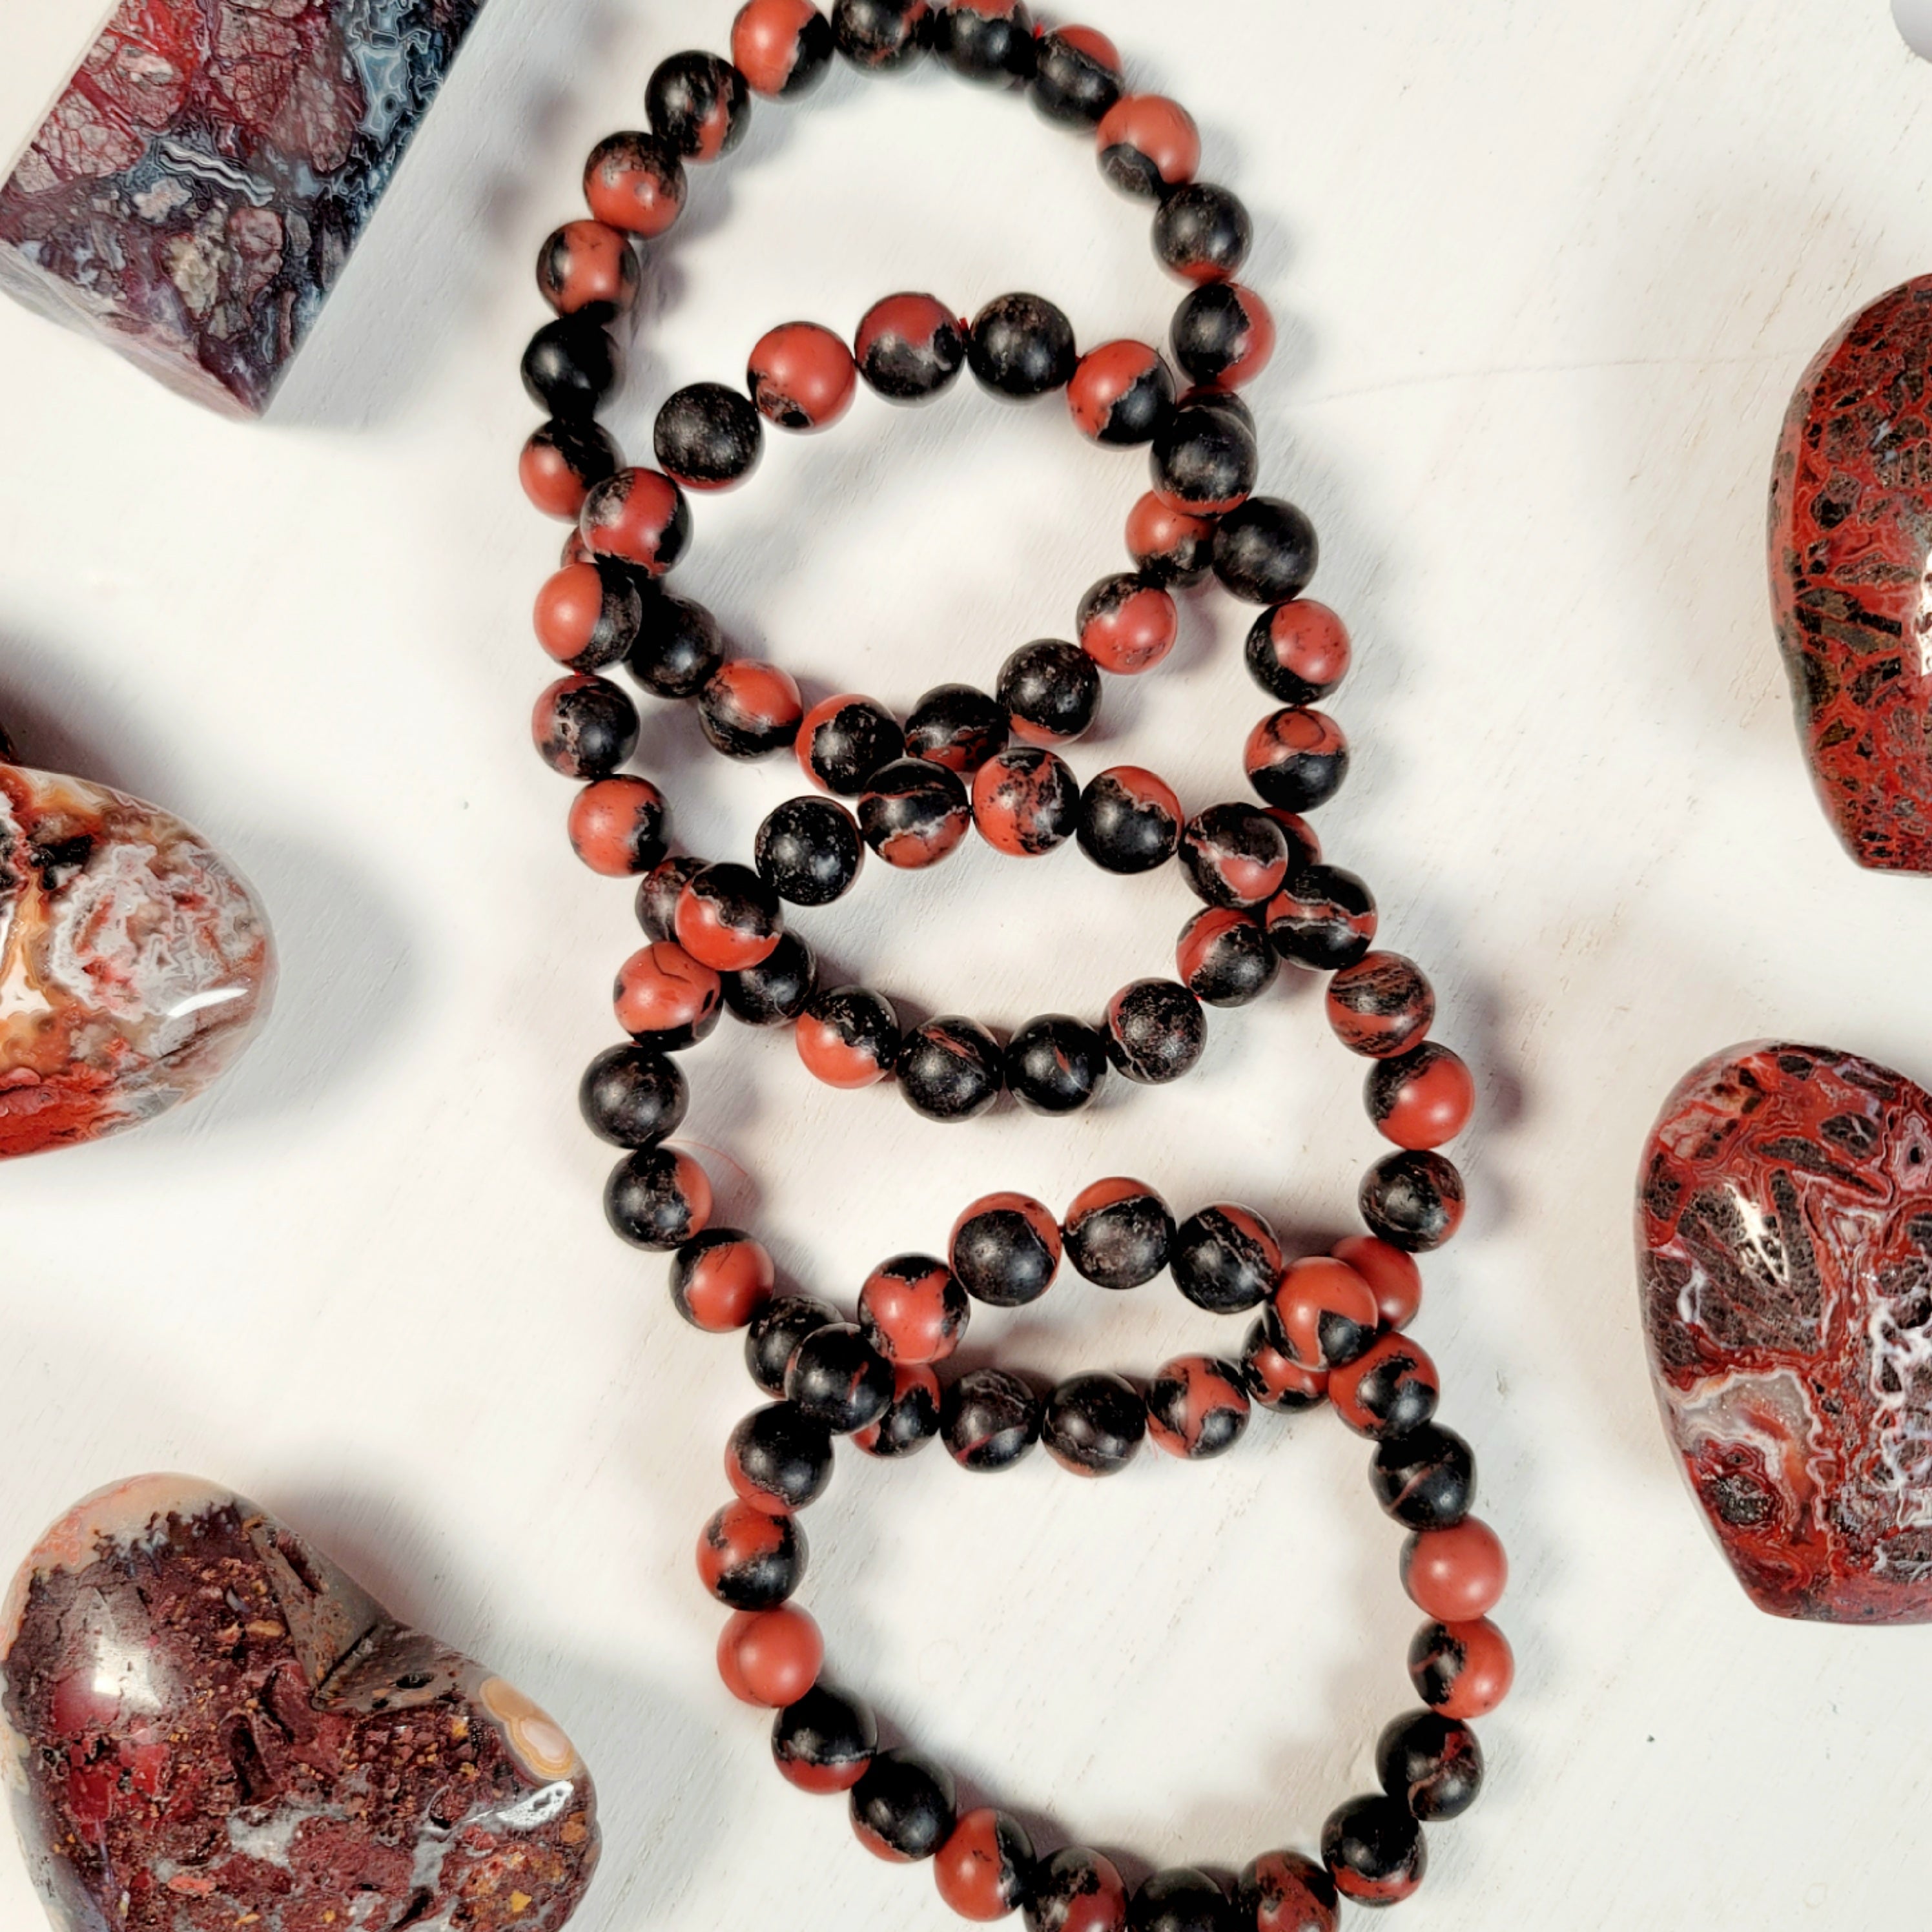 Black South Red Agate Bracelet for Creativity, Empowerment and Transformation